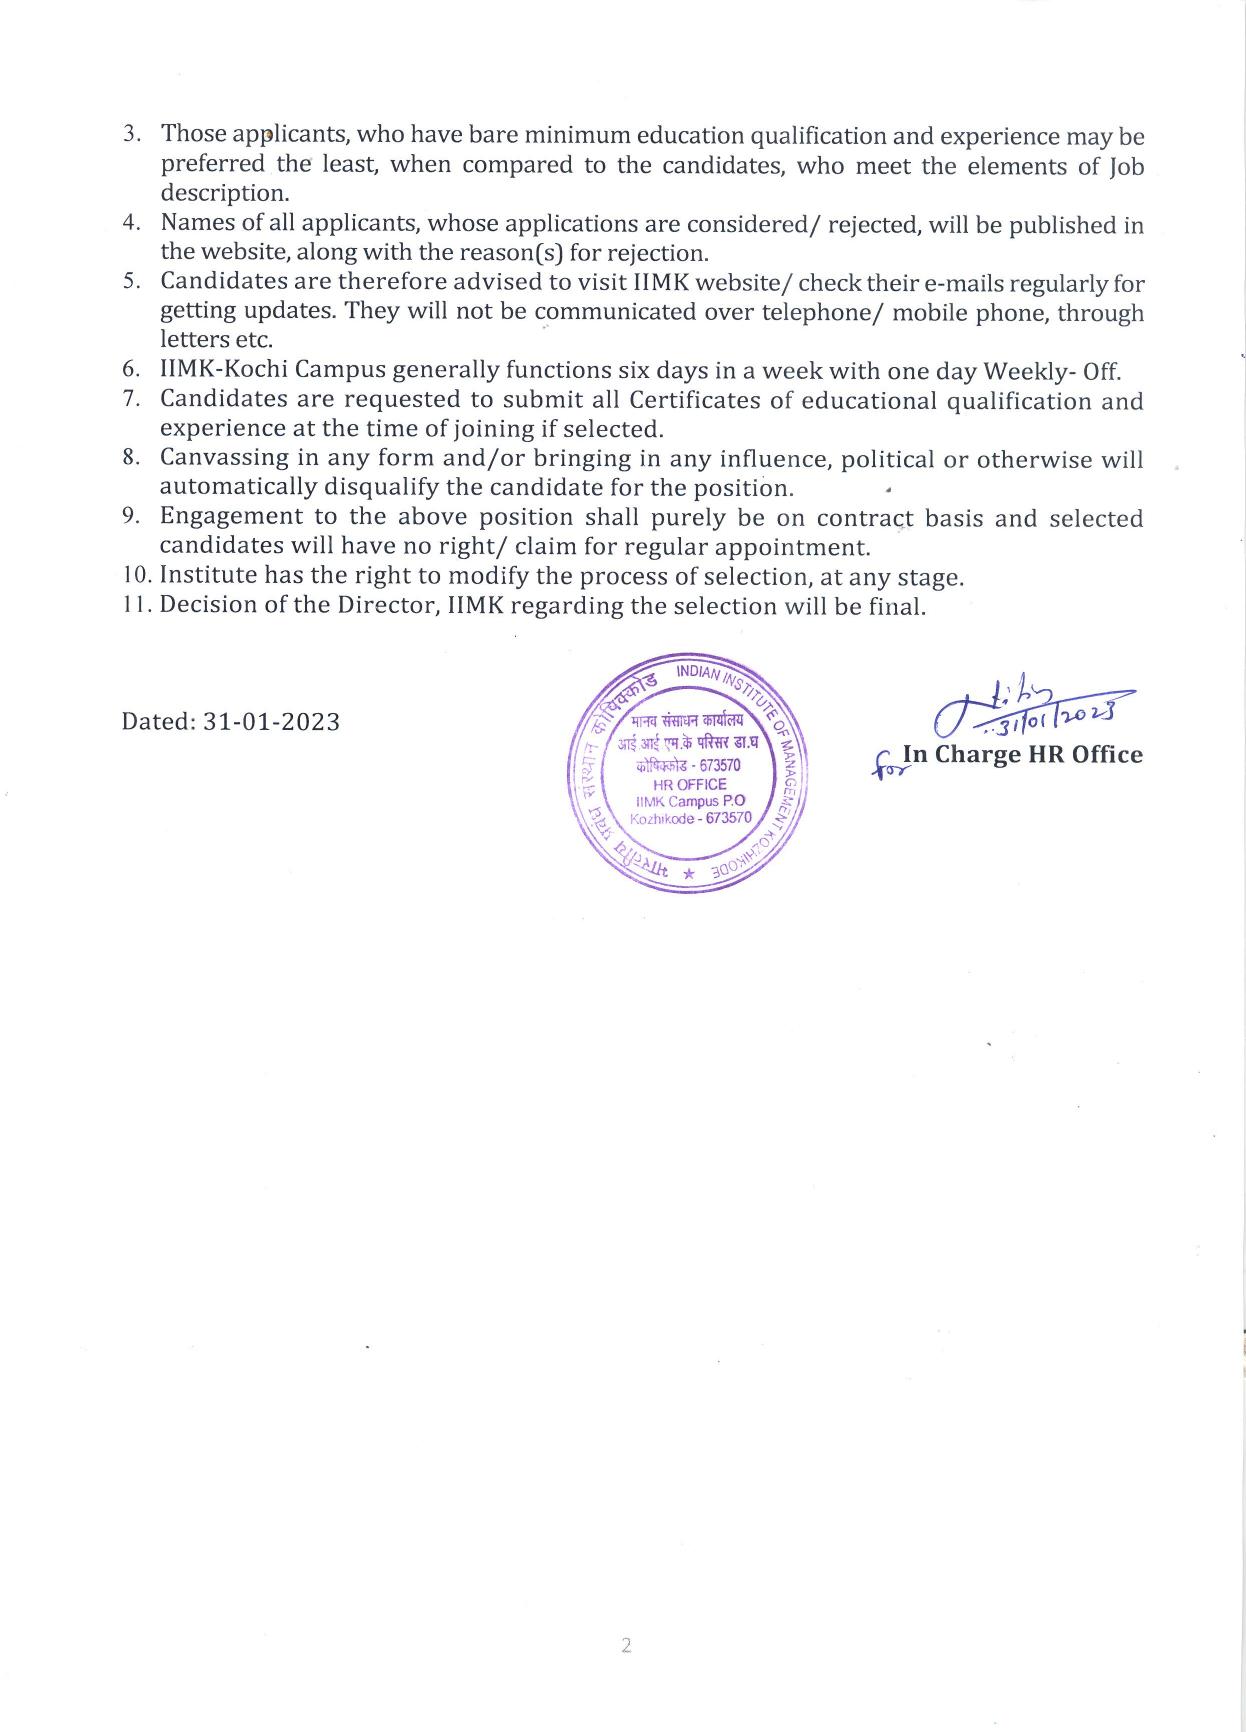 Indian Institute of Management Kozhikode Invites Application for Admin Associate Recruitment 2023 - Page 1